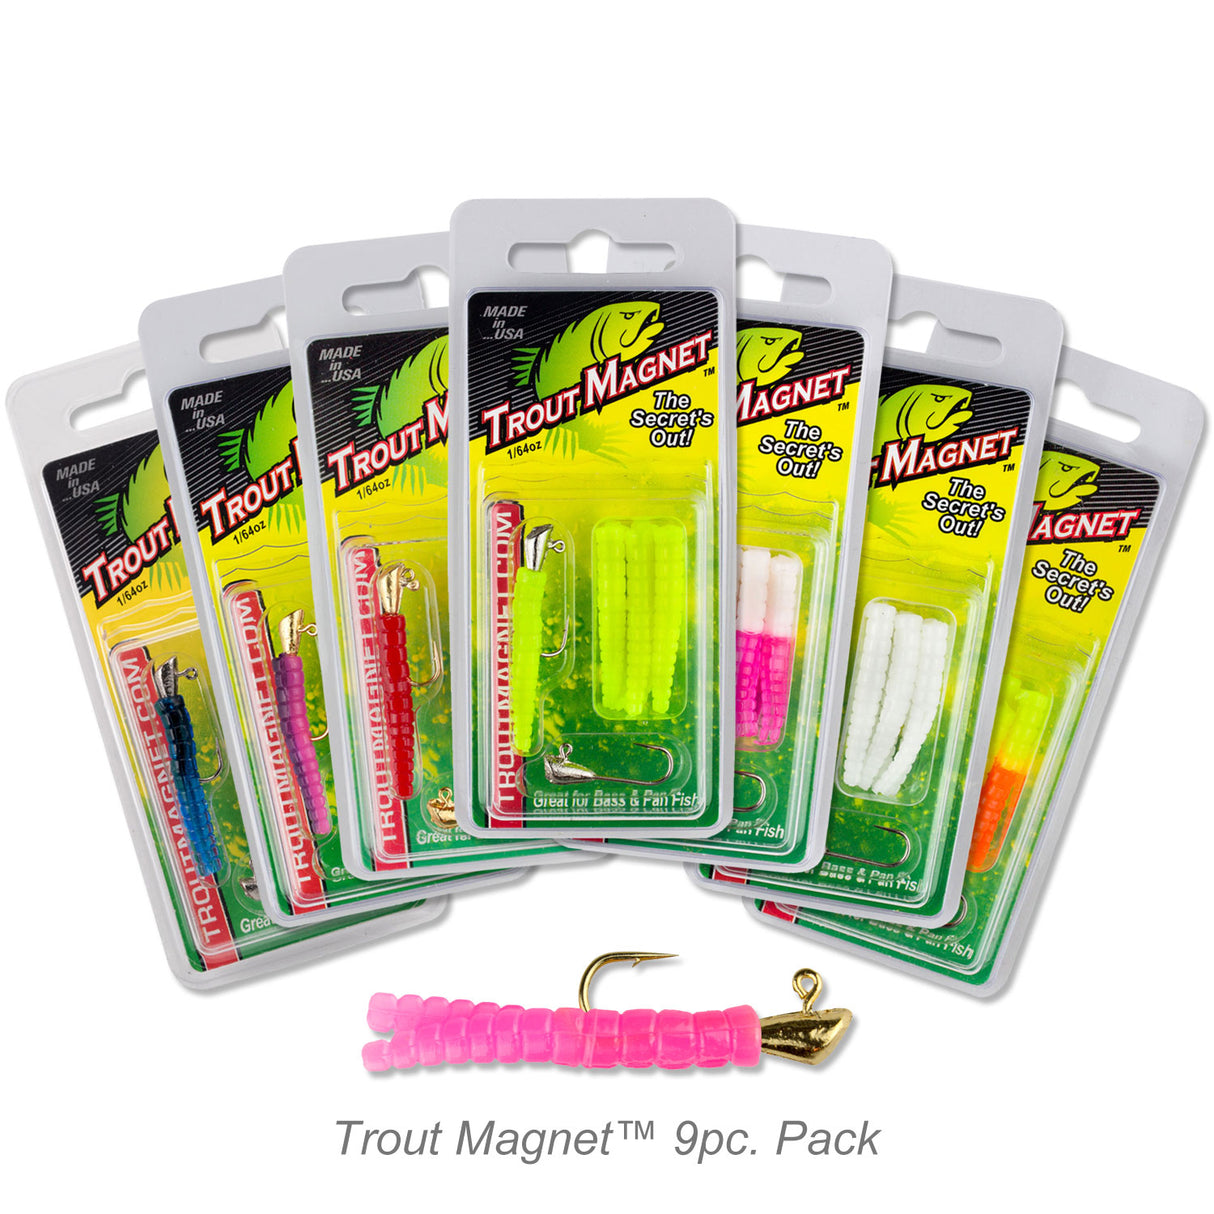 TROUT MAGNET 9 PC. PACK